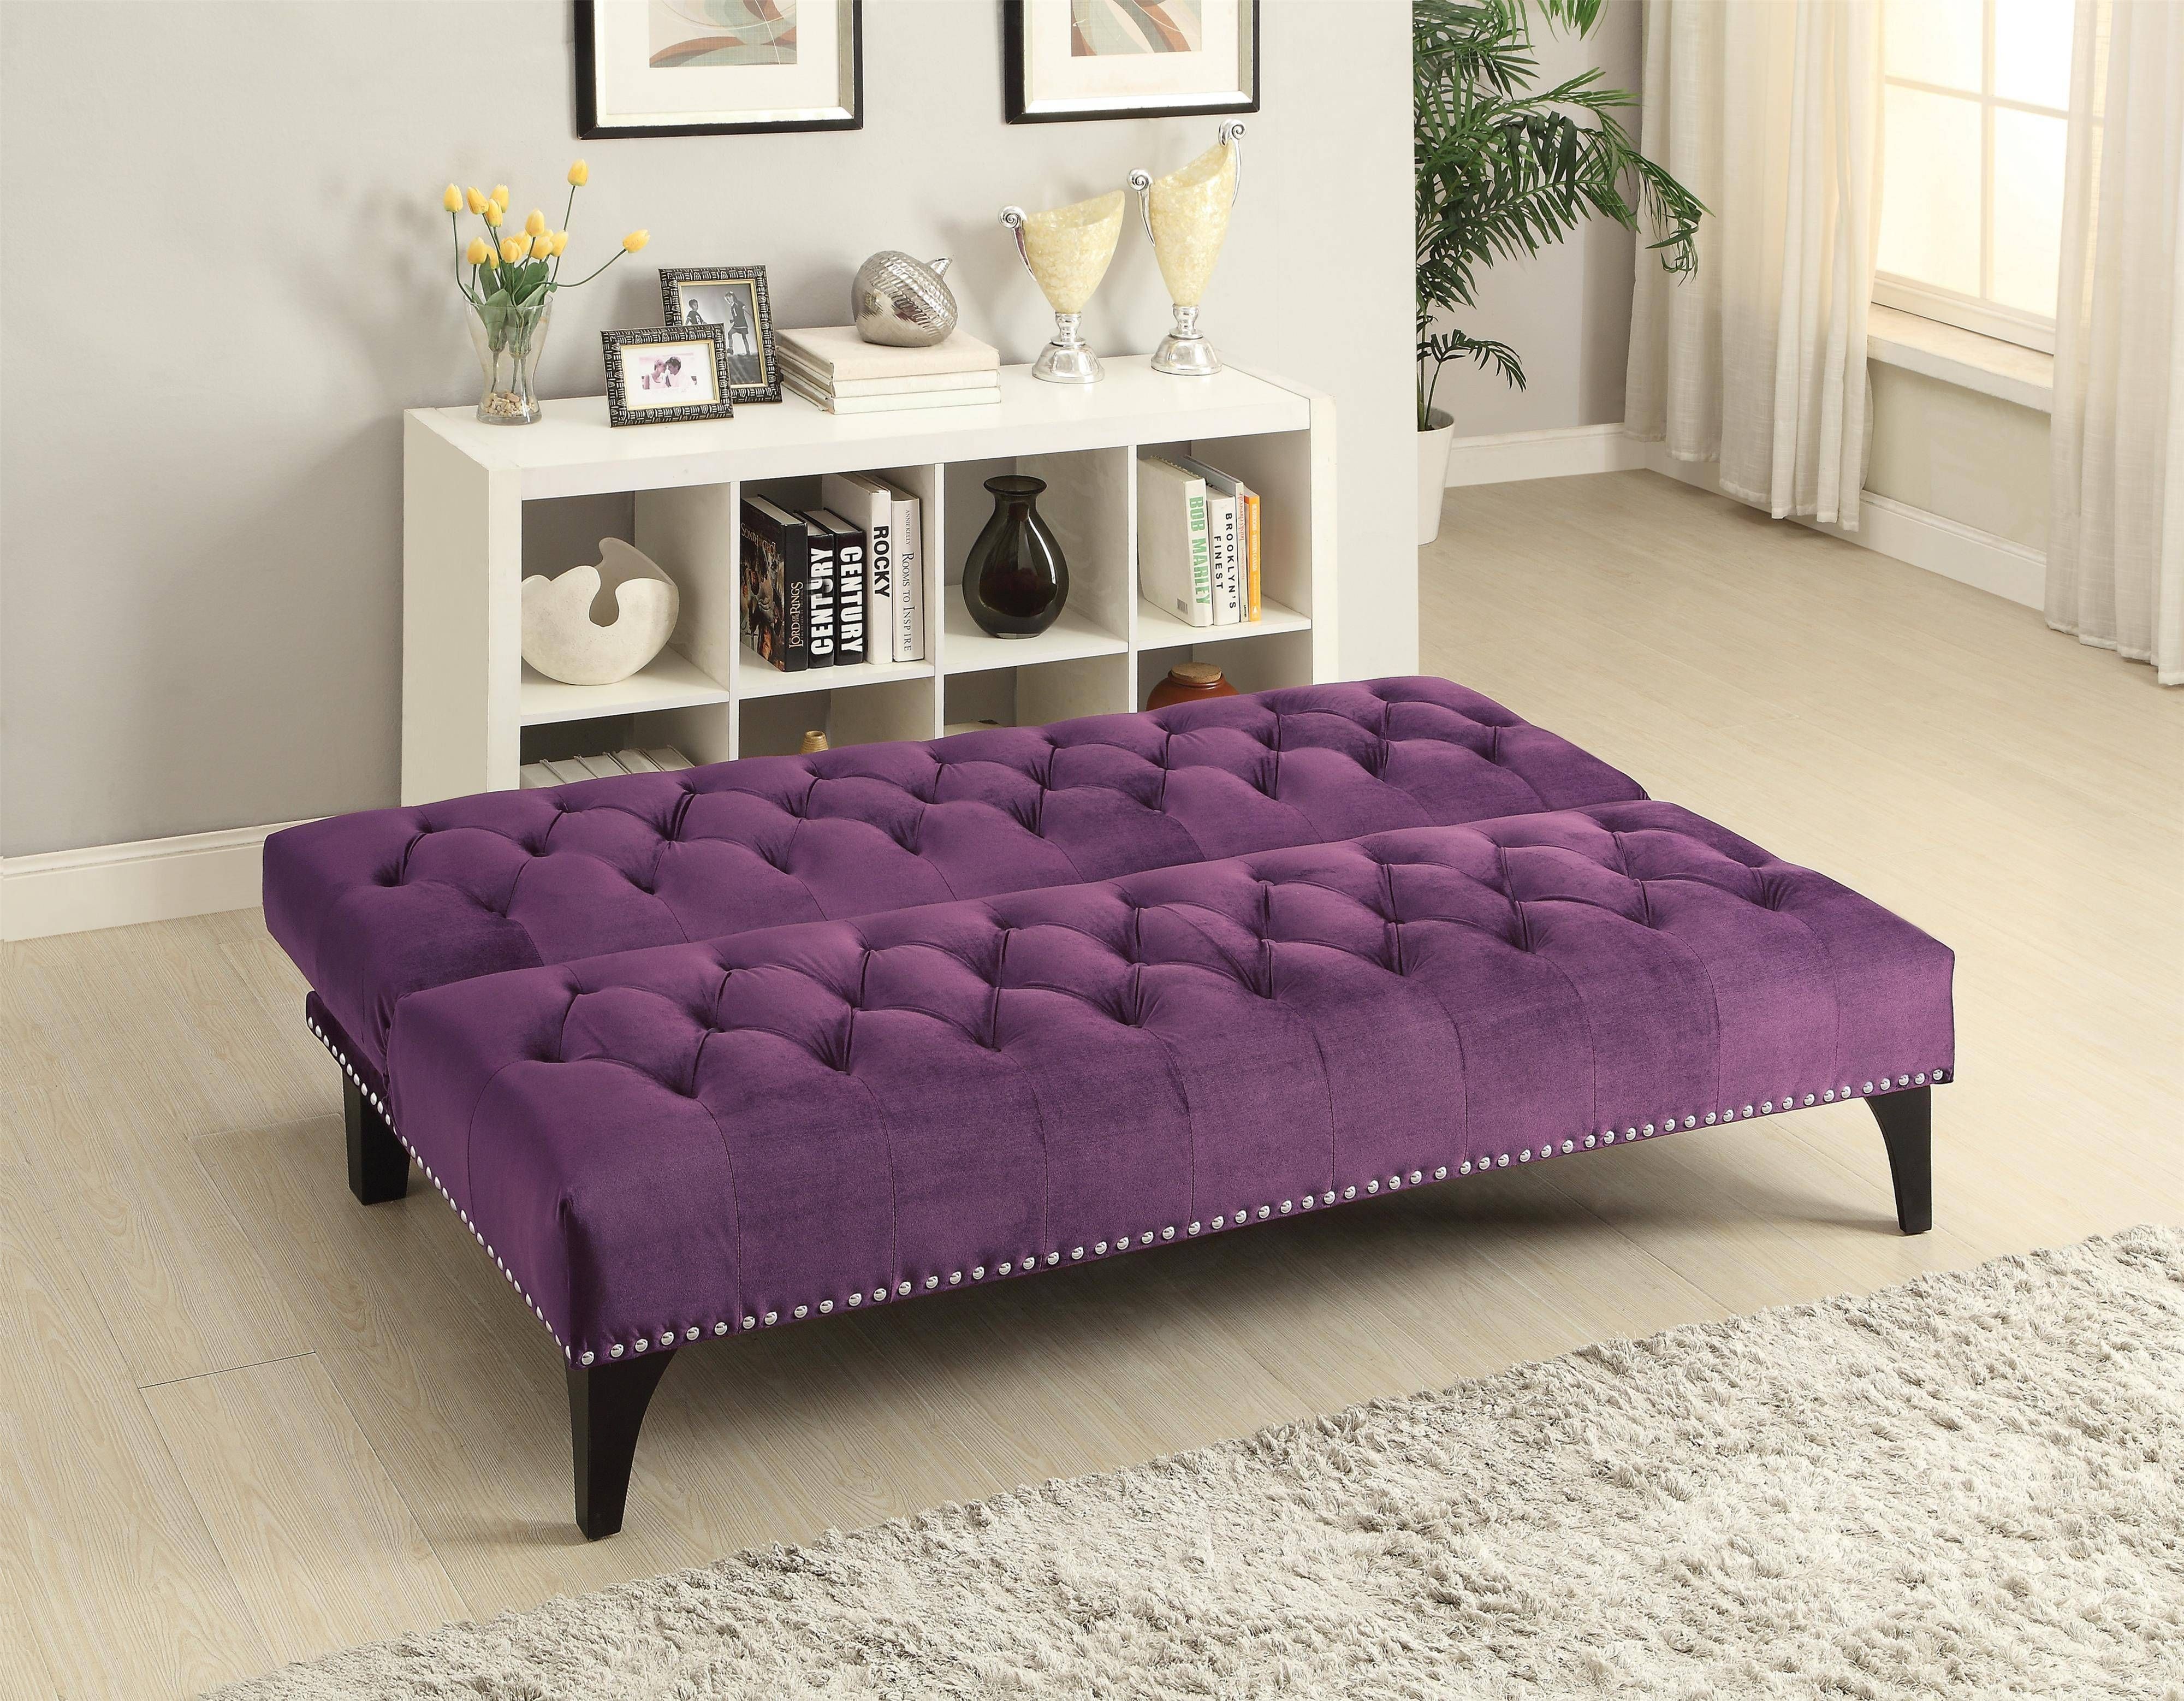 Sofa Beds And Futons Transitional Sofa Bed With Velvet Upholstery Pertaining To Velvet Purple Sofas (View 11 of 30)